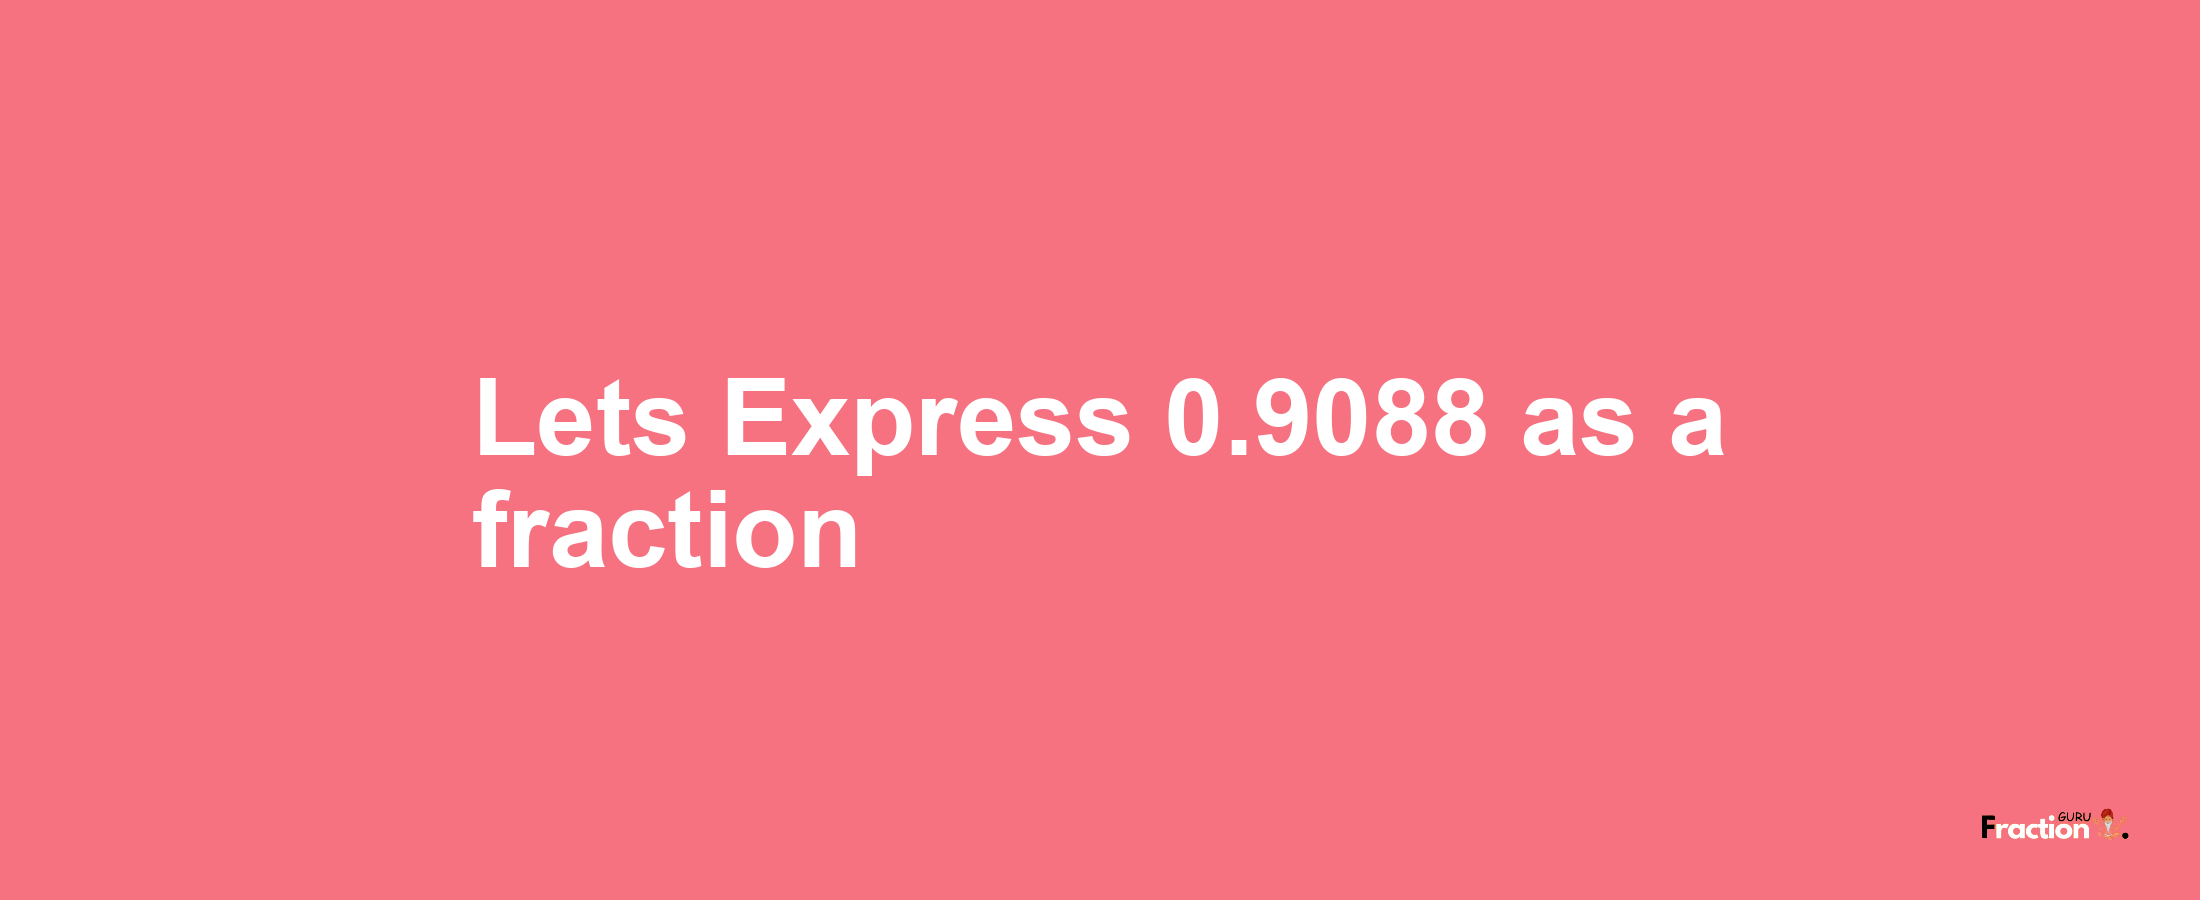 Lets Express 0.9088 as afraction